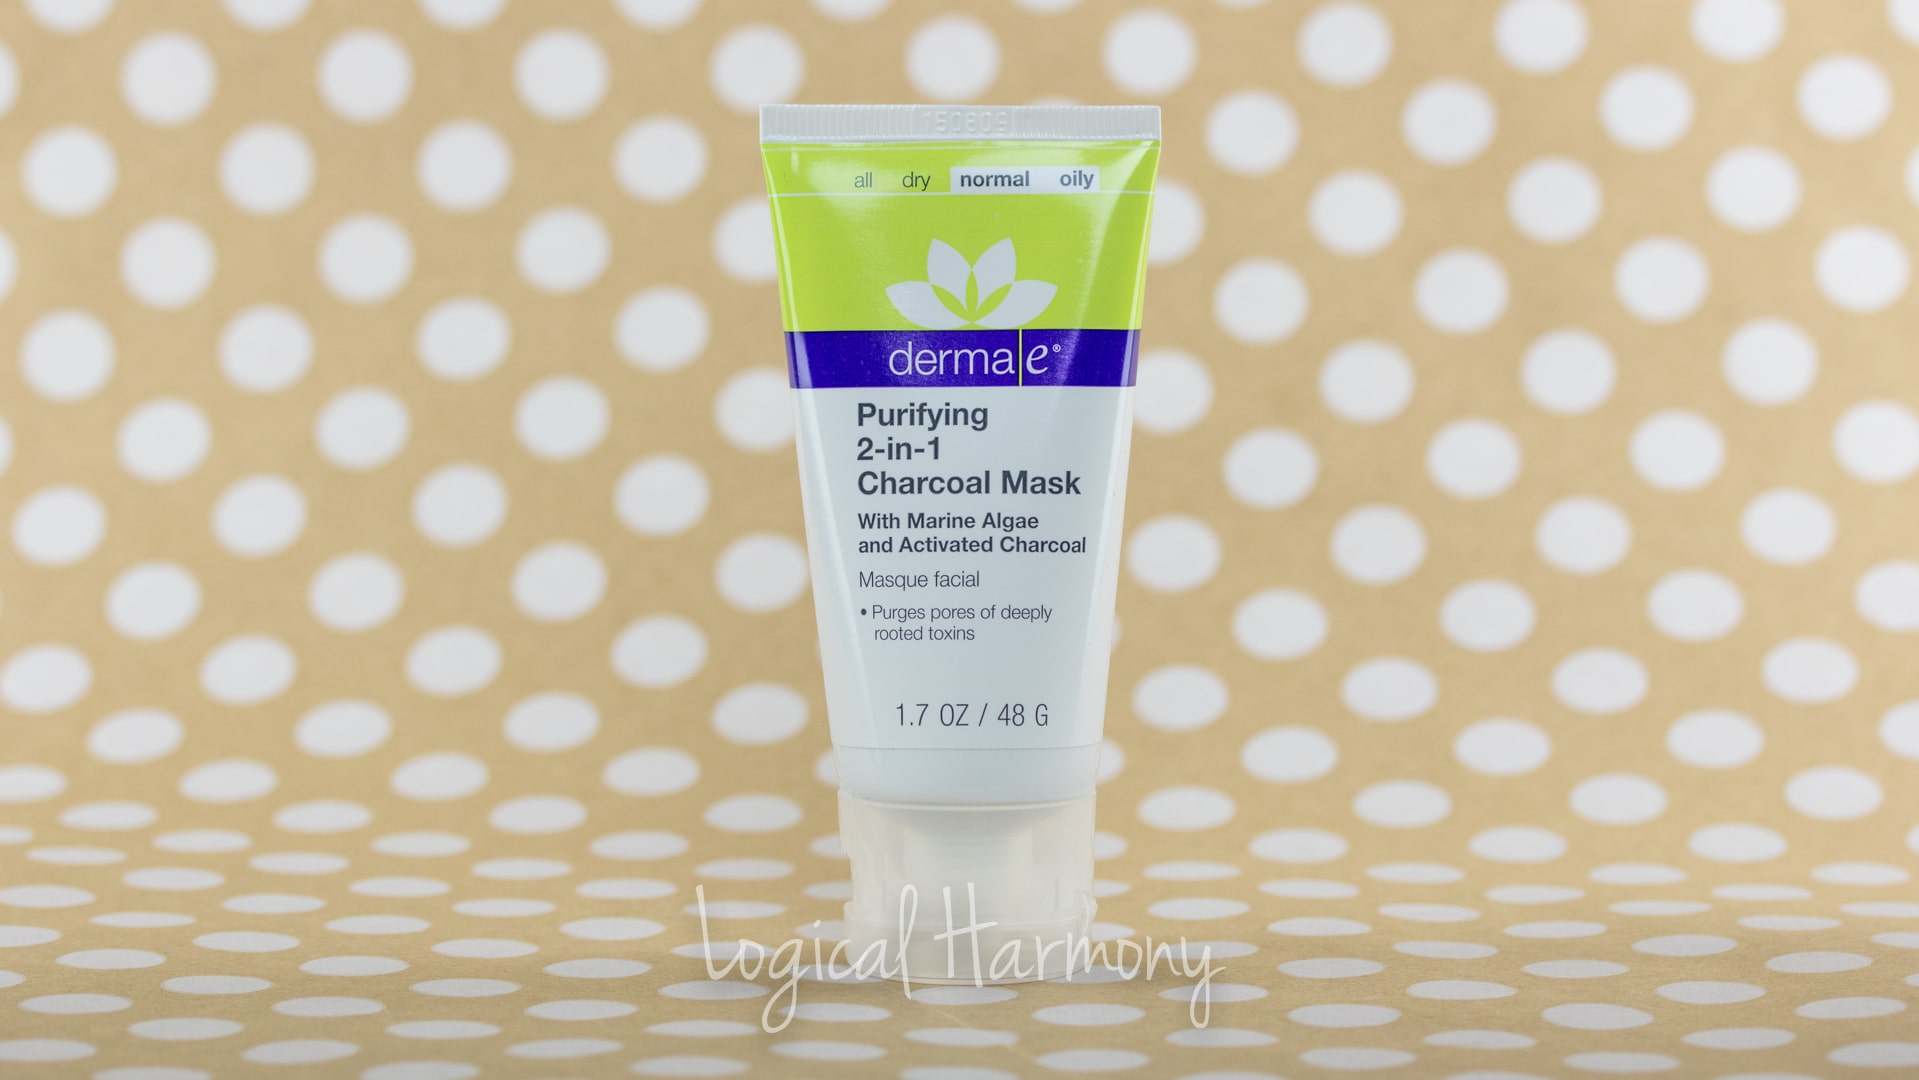 Derma E Purifying 2-in-1 Charcoal Mask Review